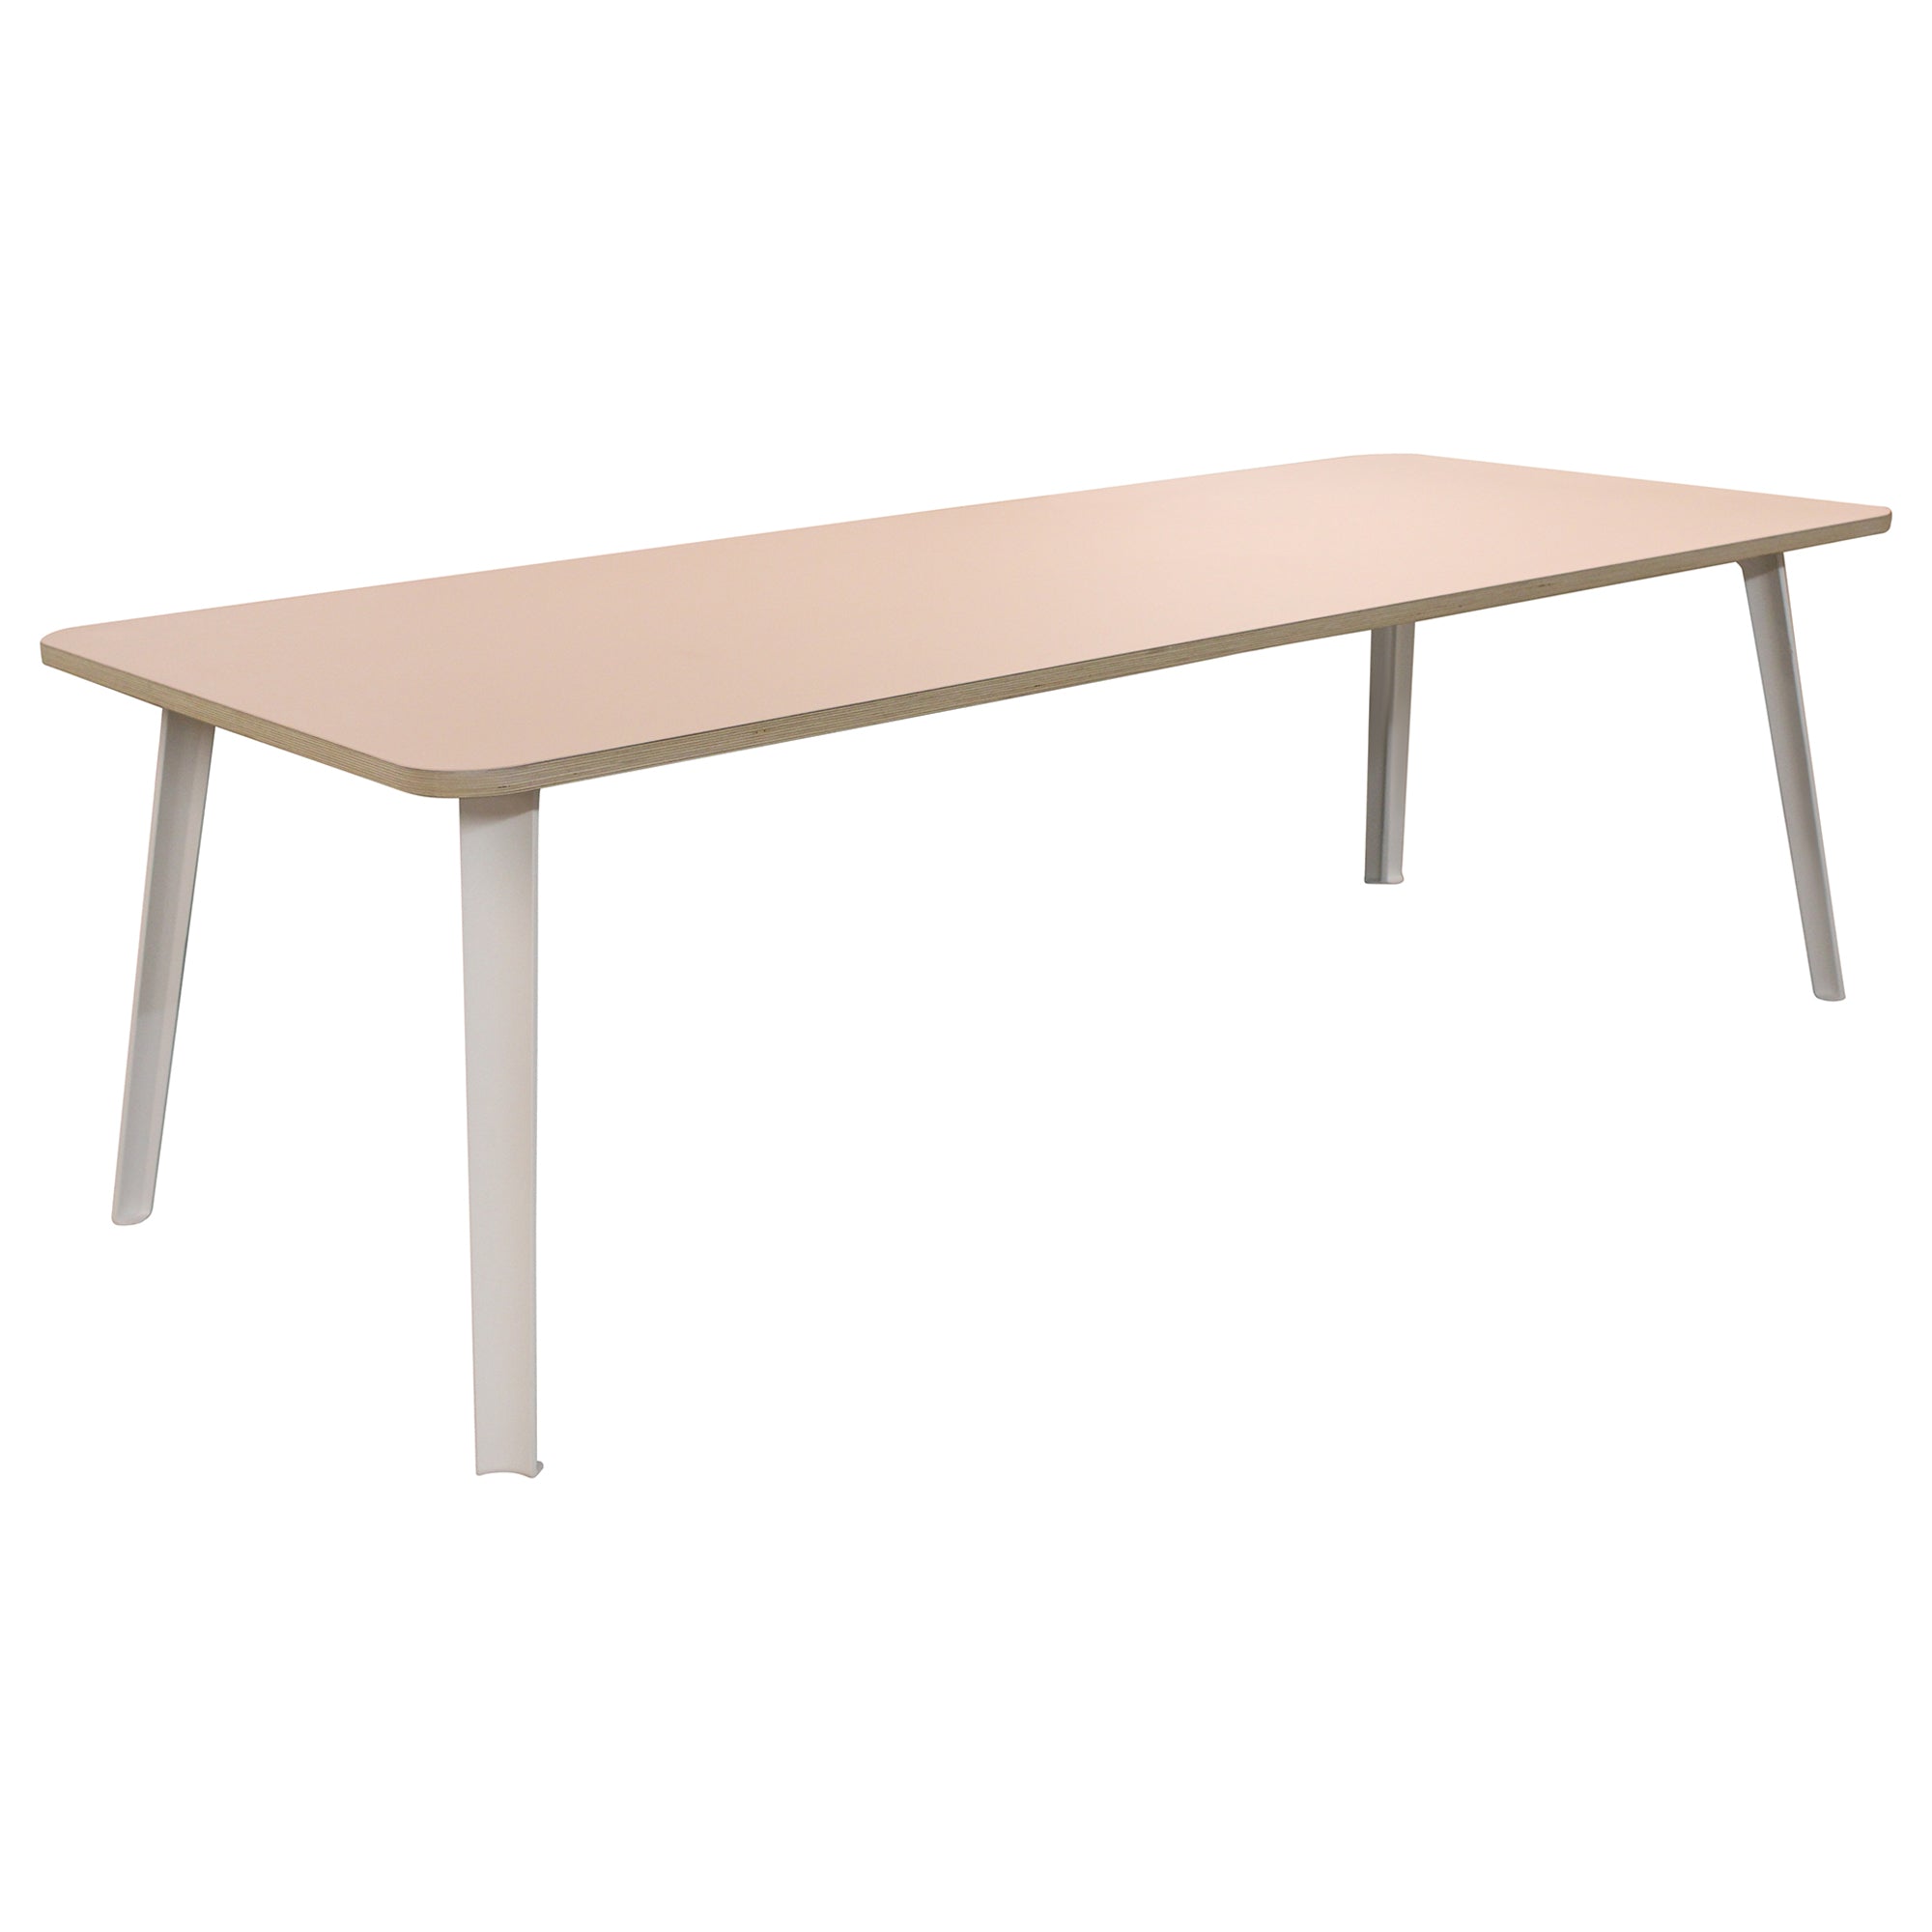 The Table by Floyd, 79in, Blush - Preowned